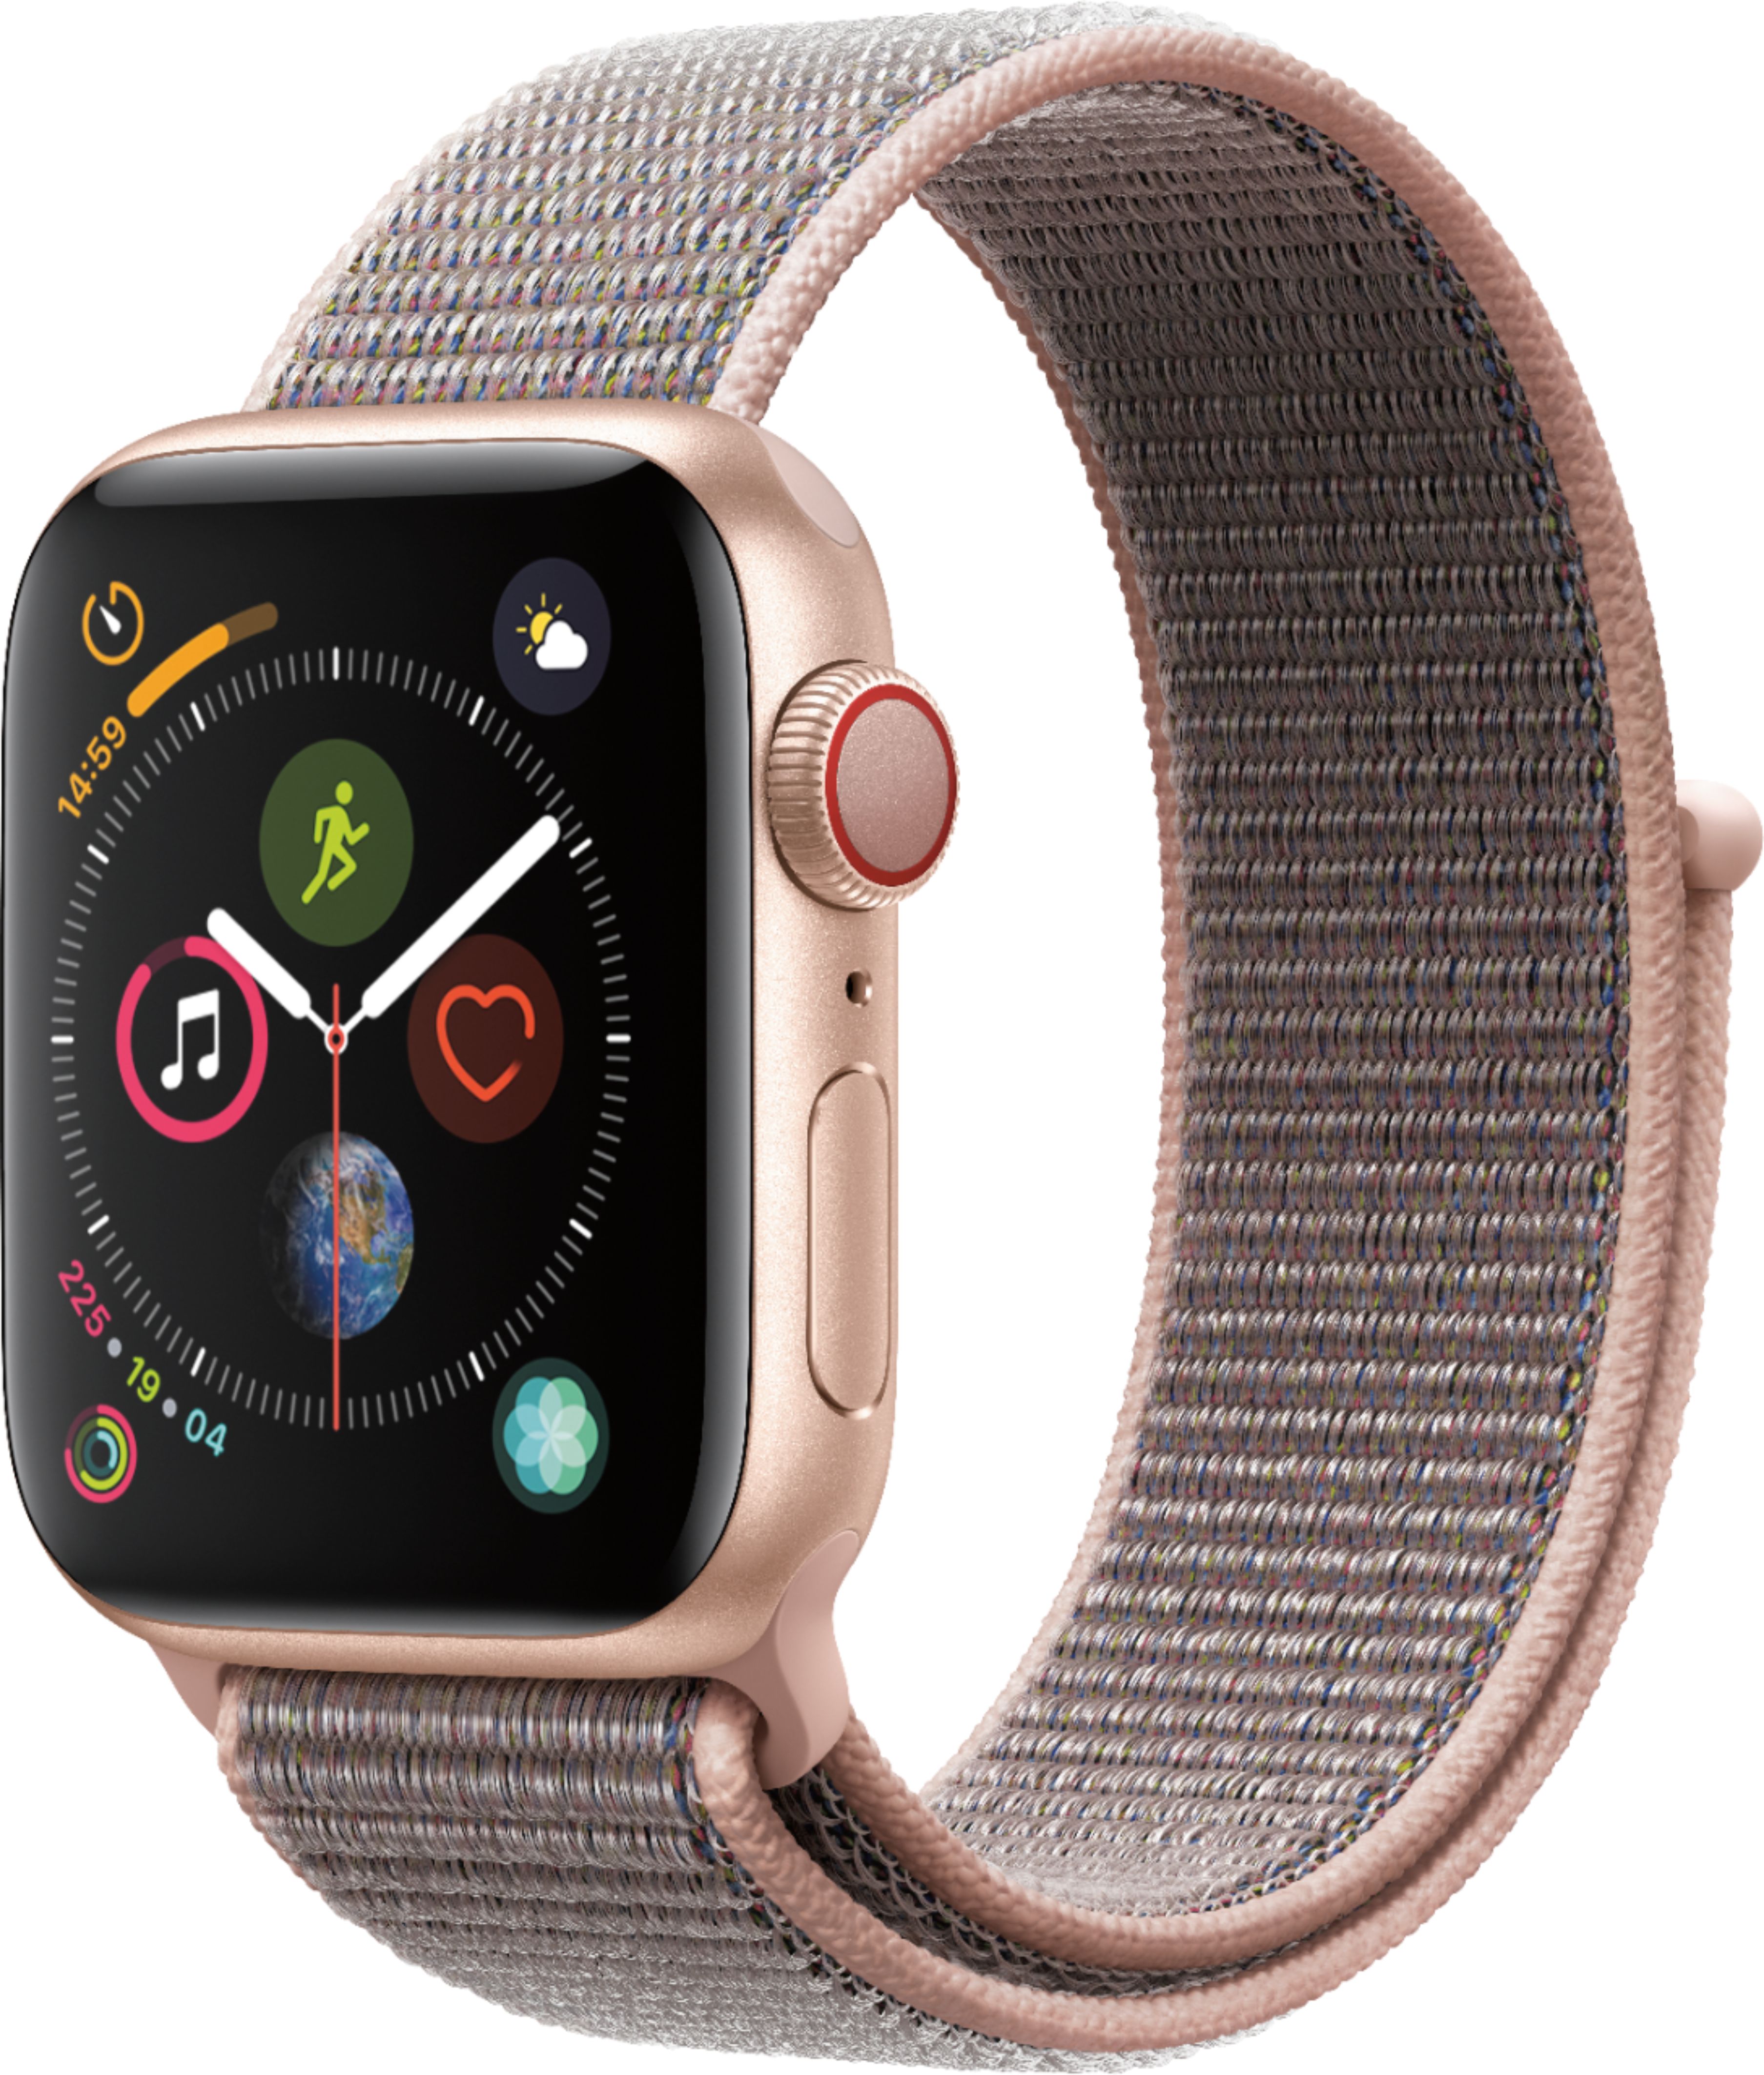 Geek Squad Certified Refurbished Apple Watch Series 4 (GPS + Cellular) 40mm Aluminum Case with Pink Sand Sport Loop - Gold